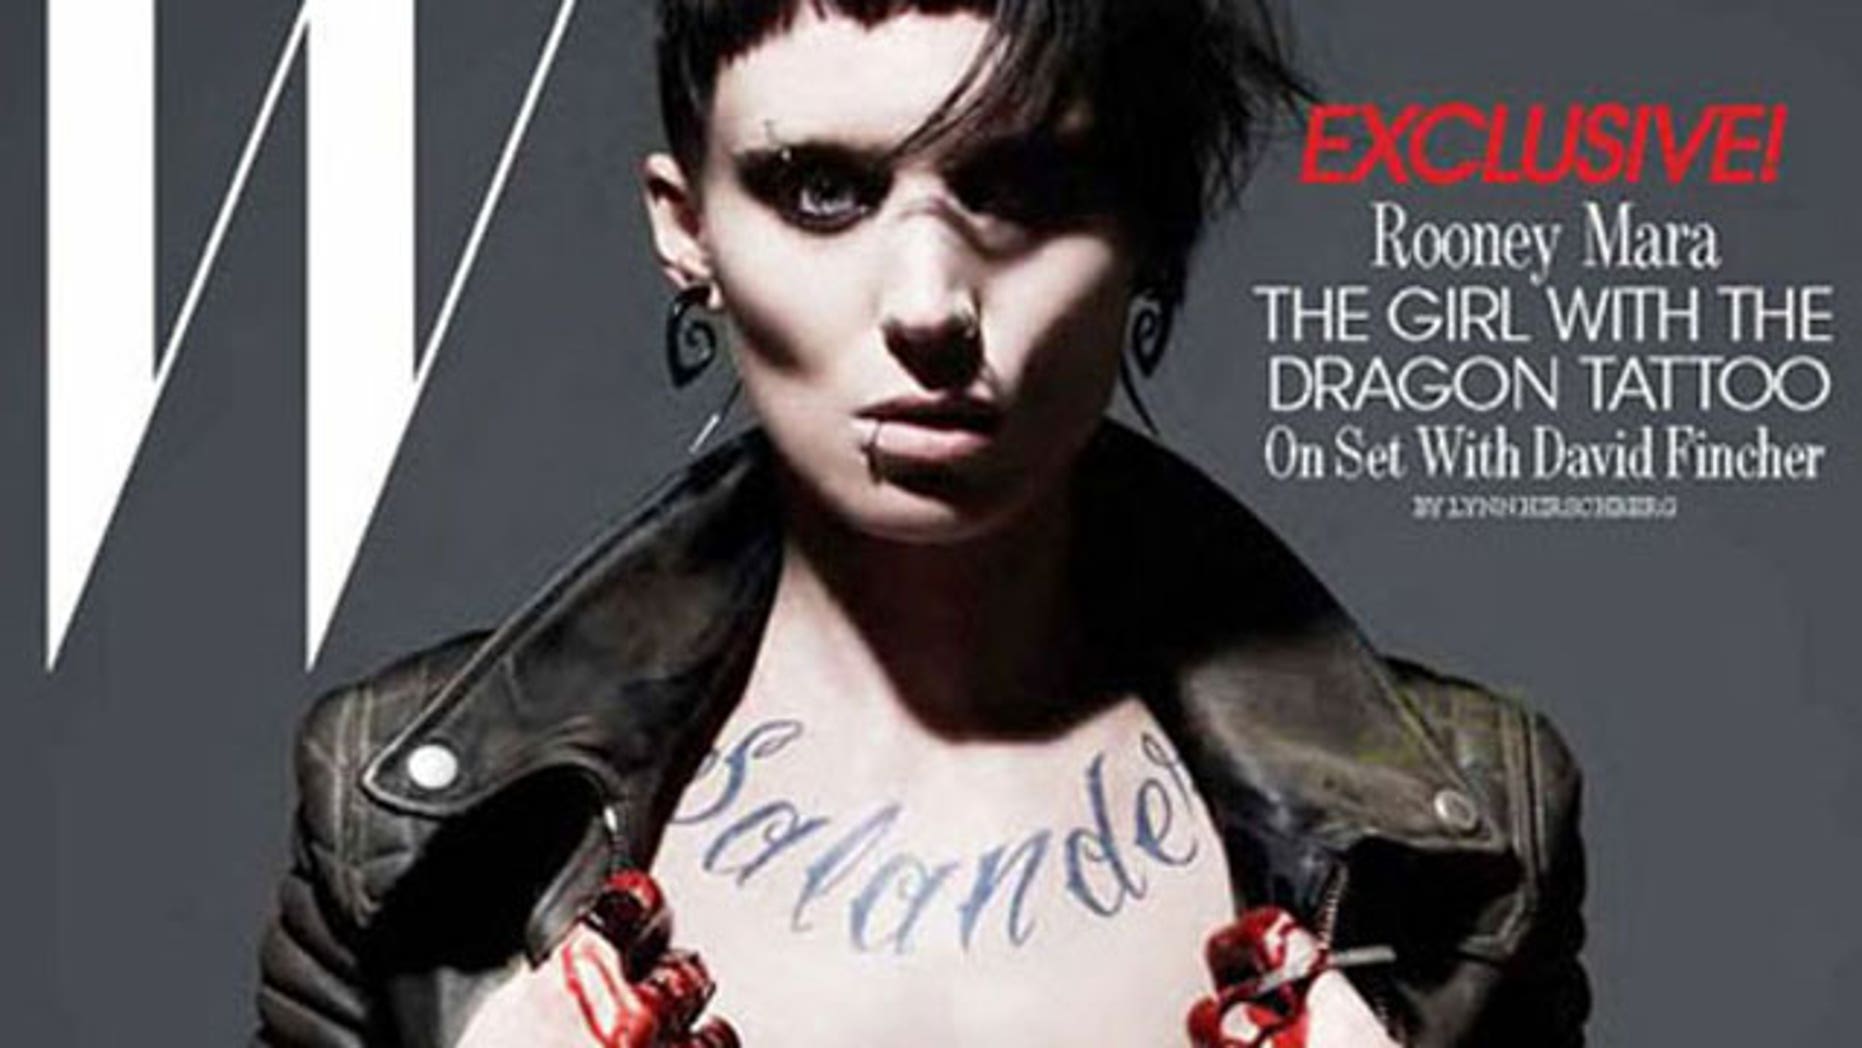 Rooney Mara Initially Freaked Over Shaved Eyebrows And Nipple 2459